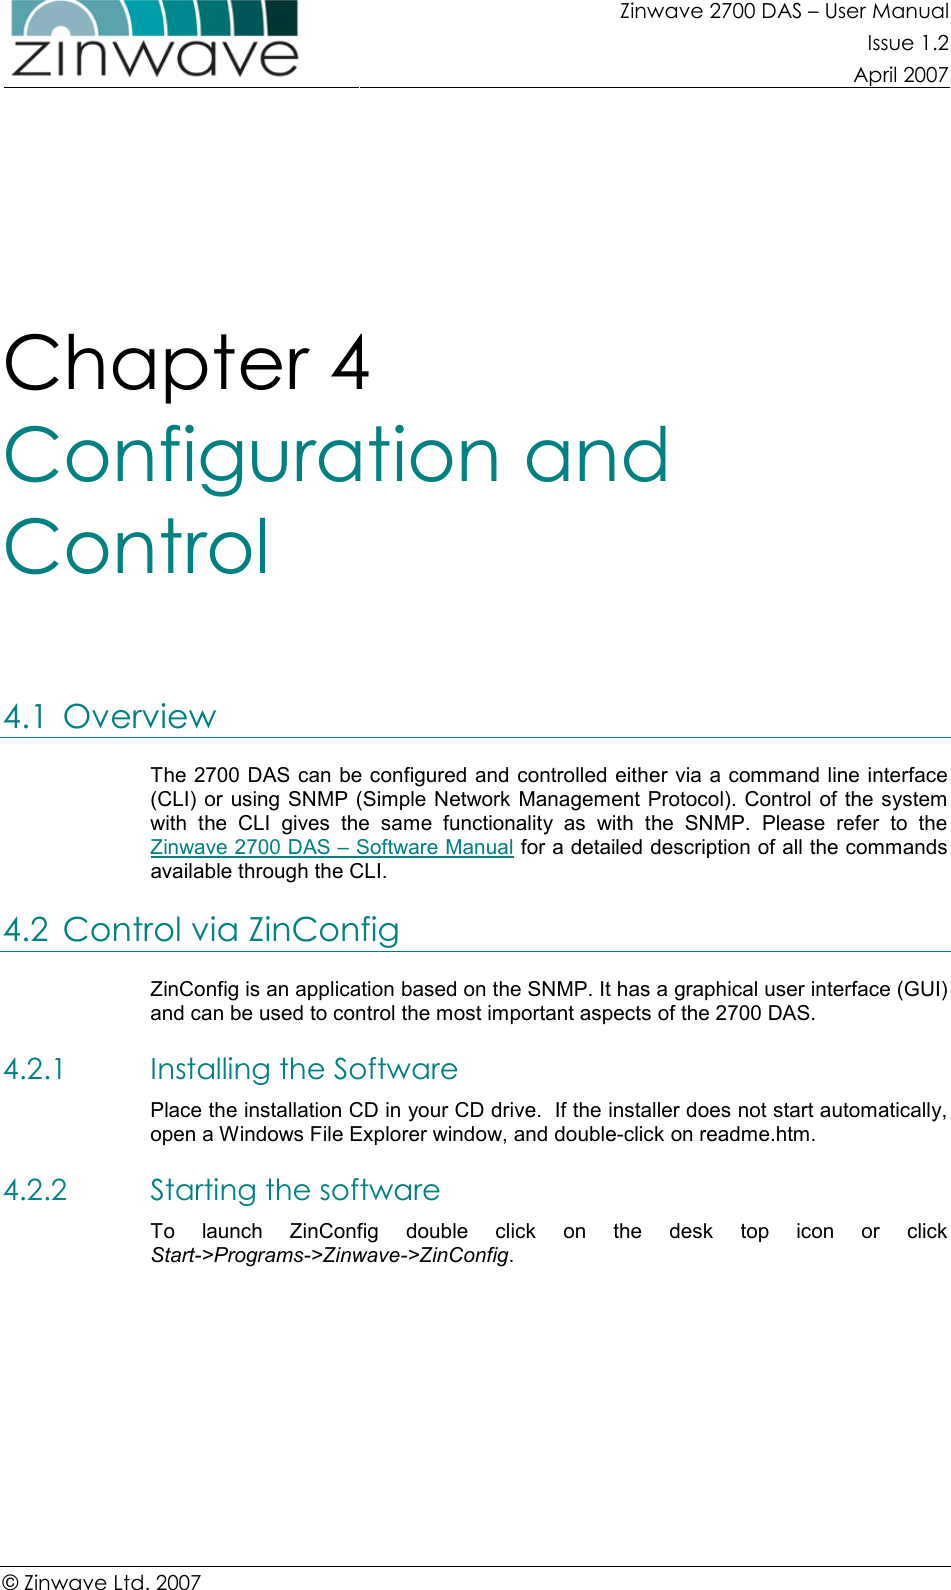 Zinwave 2700 DAS – User Manual Issue 1.2  April 2007  © Zinwave Ltd. 2007  Chapter 4  Configuration and Control 4.1 Overview The 2700 DAS can be configured and controlled either via a command line interface (CLI) or using SNMP (Simple Network Management Protocol). Control  of the system with  the  CLI  gives  the  same  functionality  as  with  the  SNMP.  Please  refer  to  the Zinwave 2700 DAS – Software Manual for a detailed description of all the commands available through the CLI. 4.2 Control via ZinConfig ZinConfig is an application based on the SNMP. It has a graphical user interface (GUI) and can be used to control the most important aspects of the 2700 DAS.  4.2.1 Installing the Software Place the installation CD in your CD drive.  If the installer does not start automatically, open a Windows File Explorer window, and double-click on readme.htm. 4.2.2 Starting the software To  launch  ZinConfig  double  click  on  the  desk  top  icon  or  click Start-&gt;Programs-&gt;Zinwave-&gt;ZinConfig.         